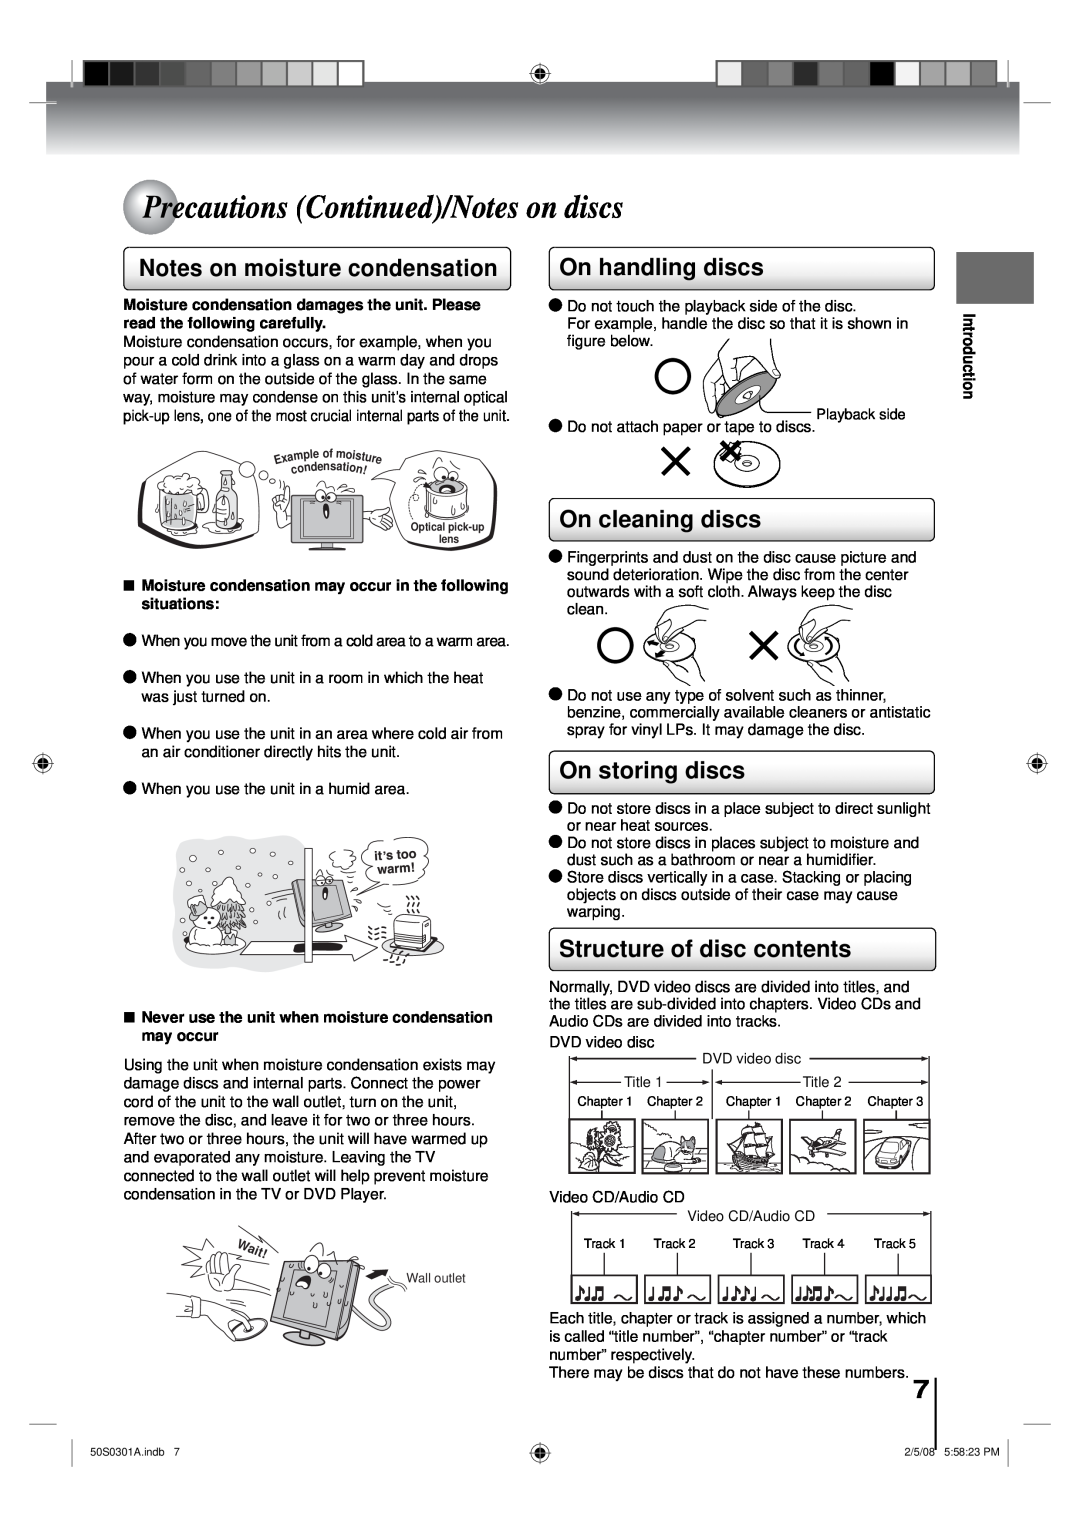 Toshiba 19LV505C Precautions Continued/Notes on discs, Notes on moisture condensation, On handling discs, On storing discs 